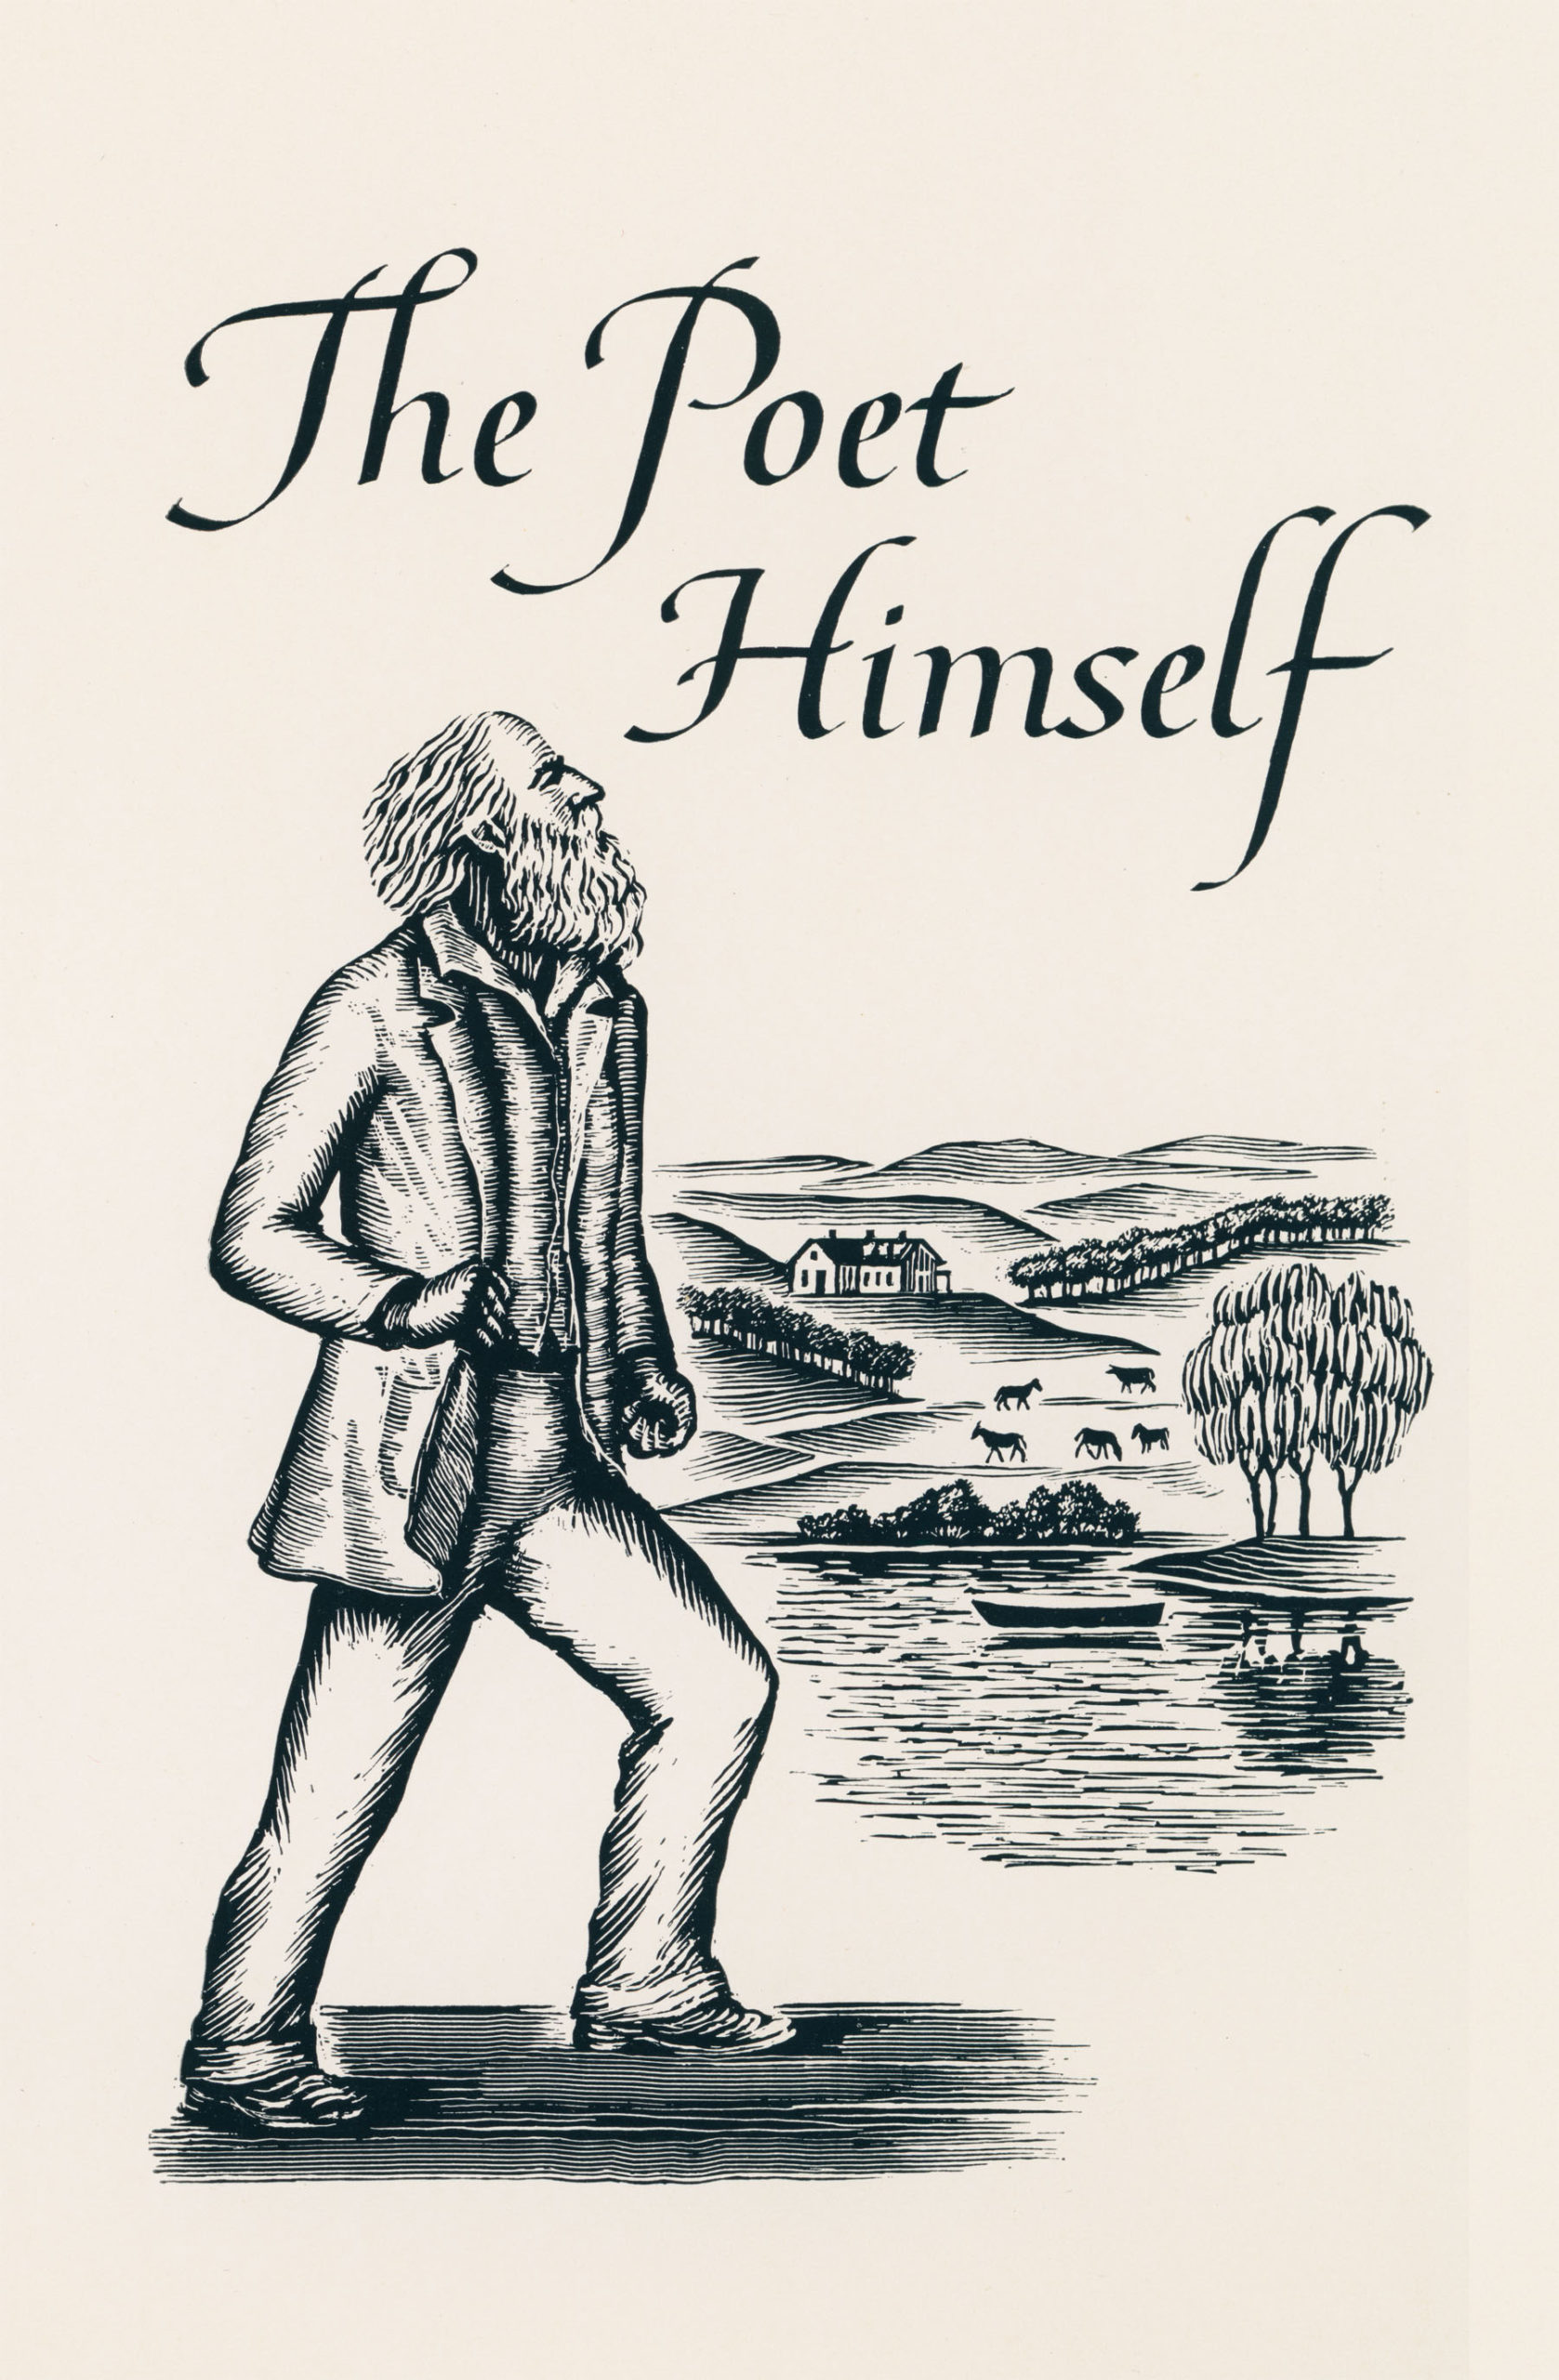 100 Poems About People: The Poet Himself